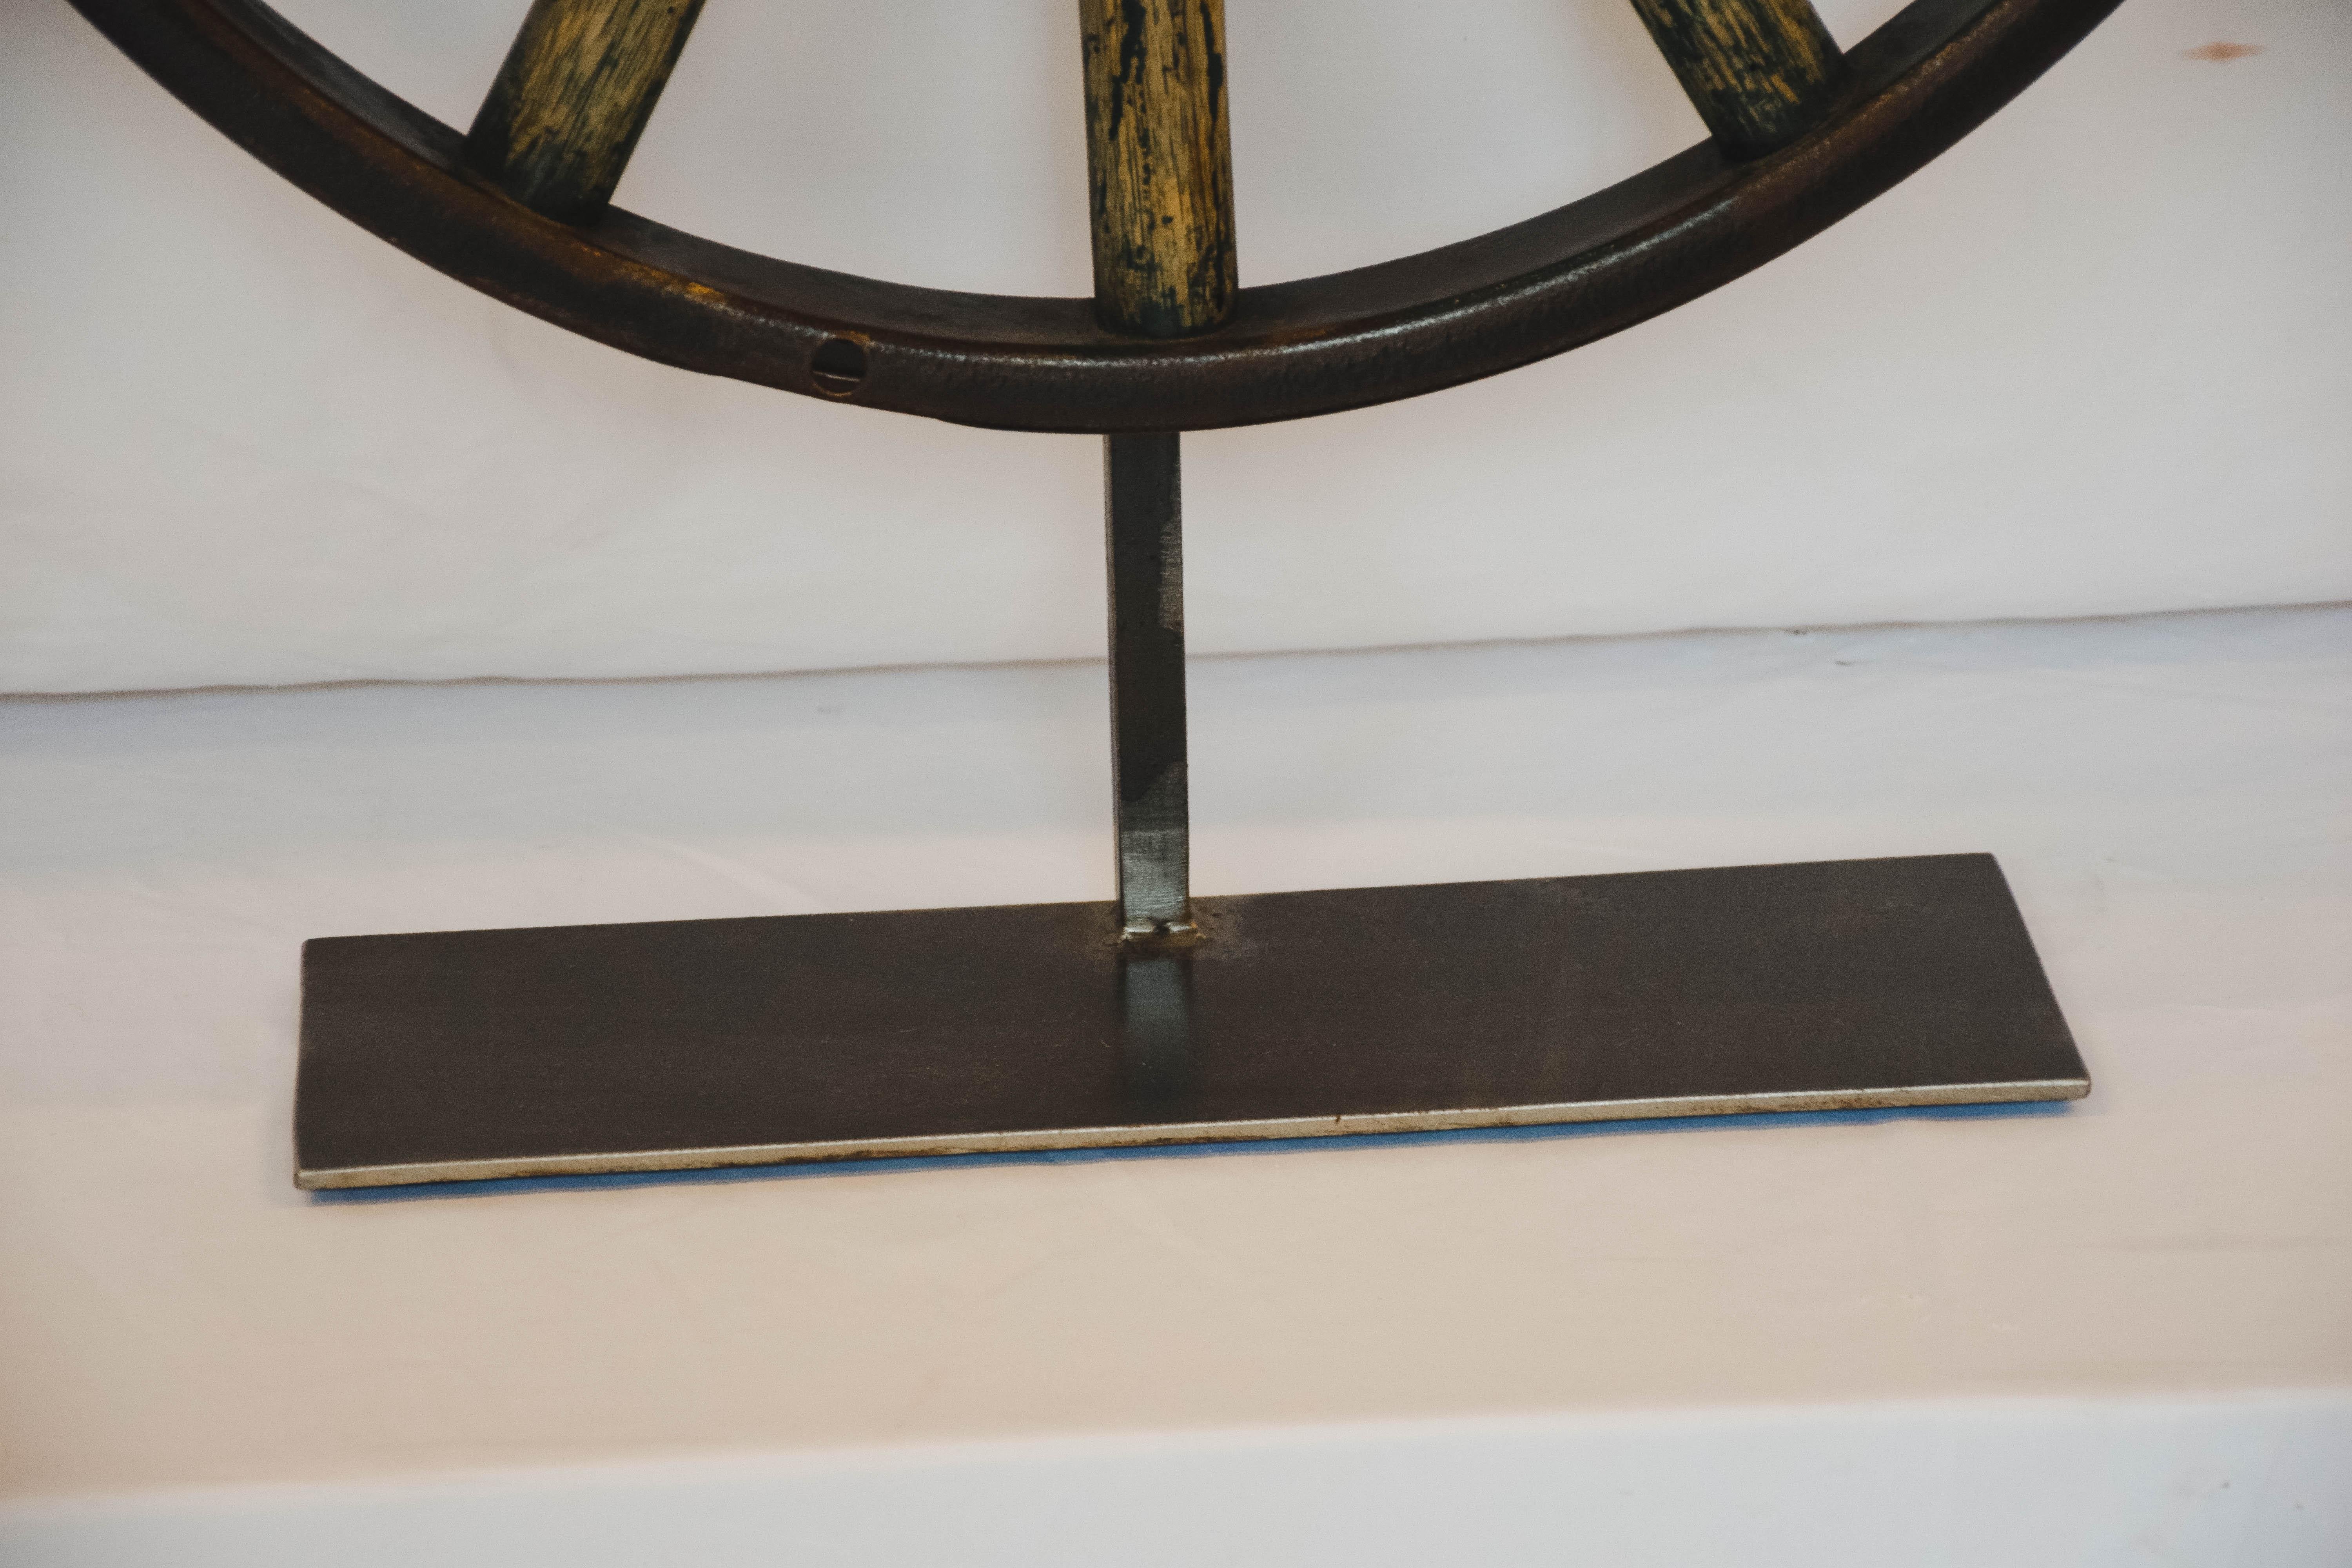 This Wagon wheel on an iron stand would be great as an accent or made into a lamp!